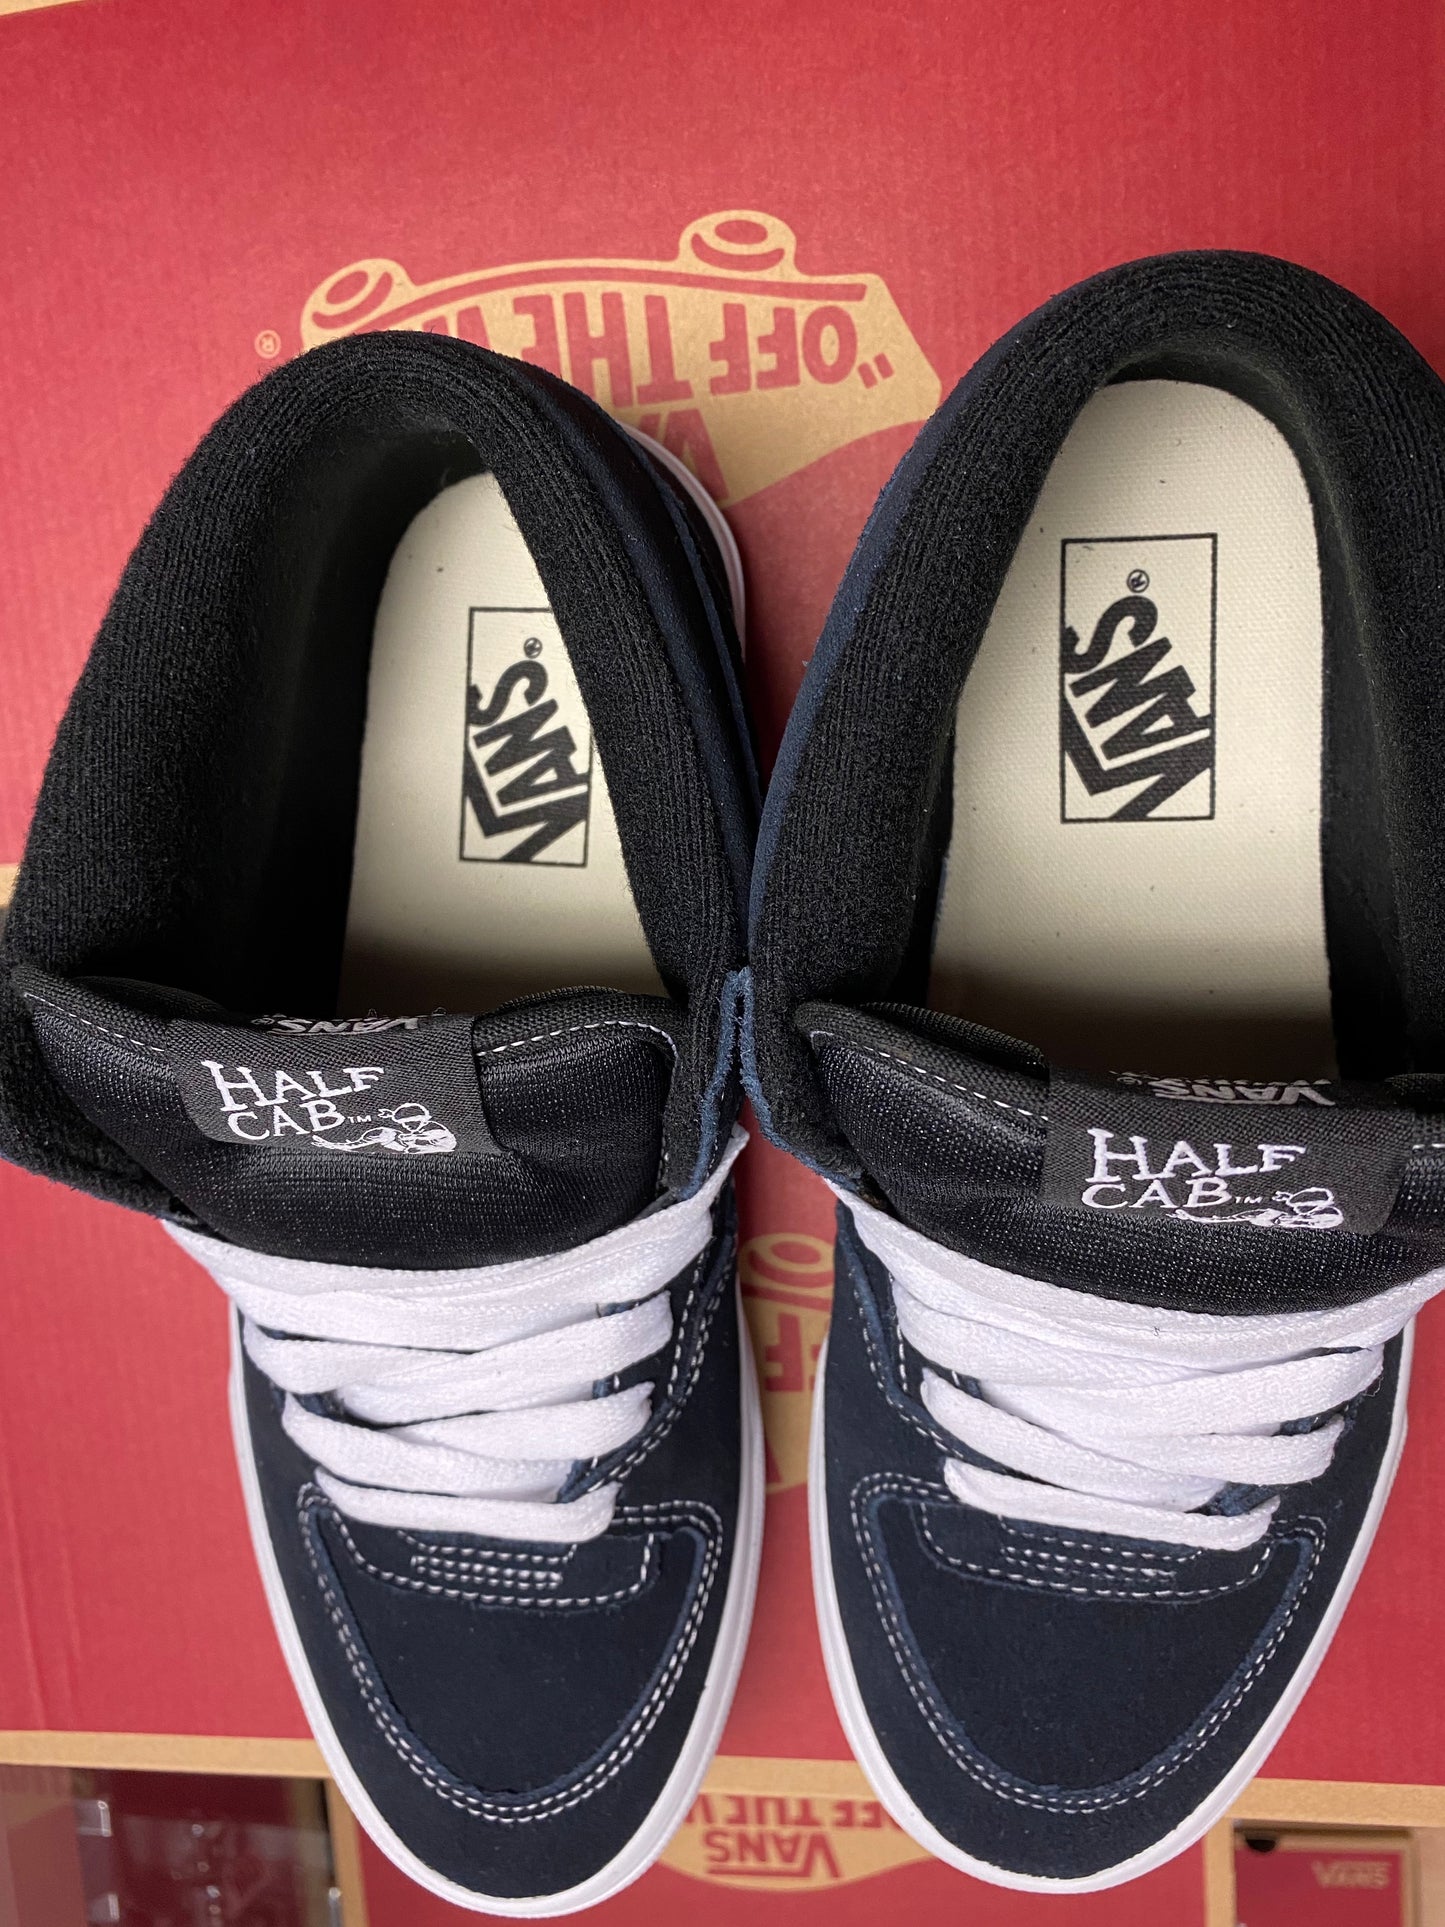 Half Cab Shoe Nvy/Wht (size options listed)